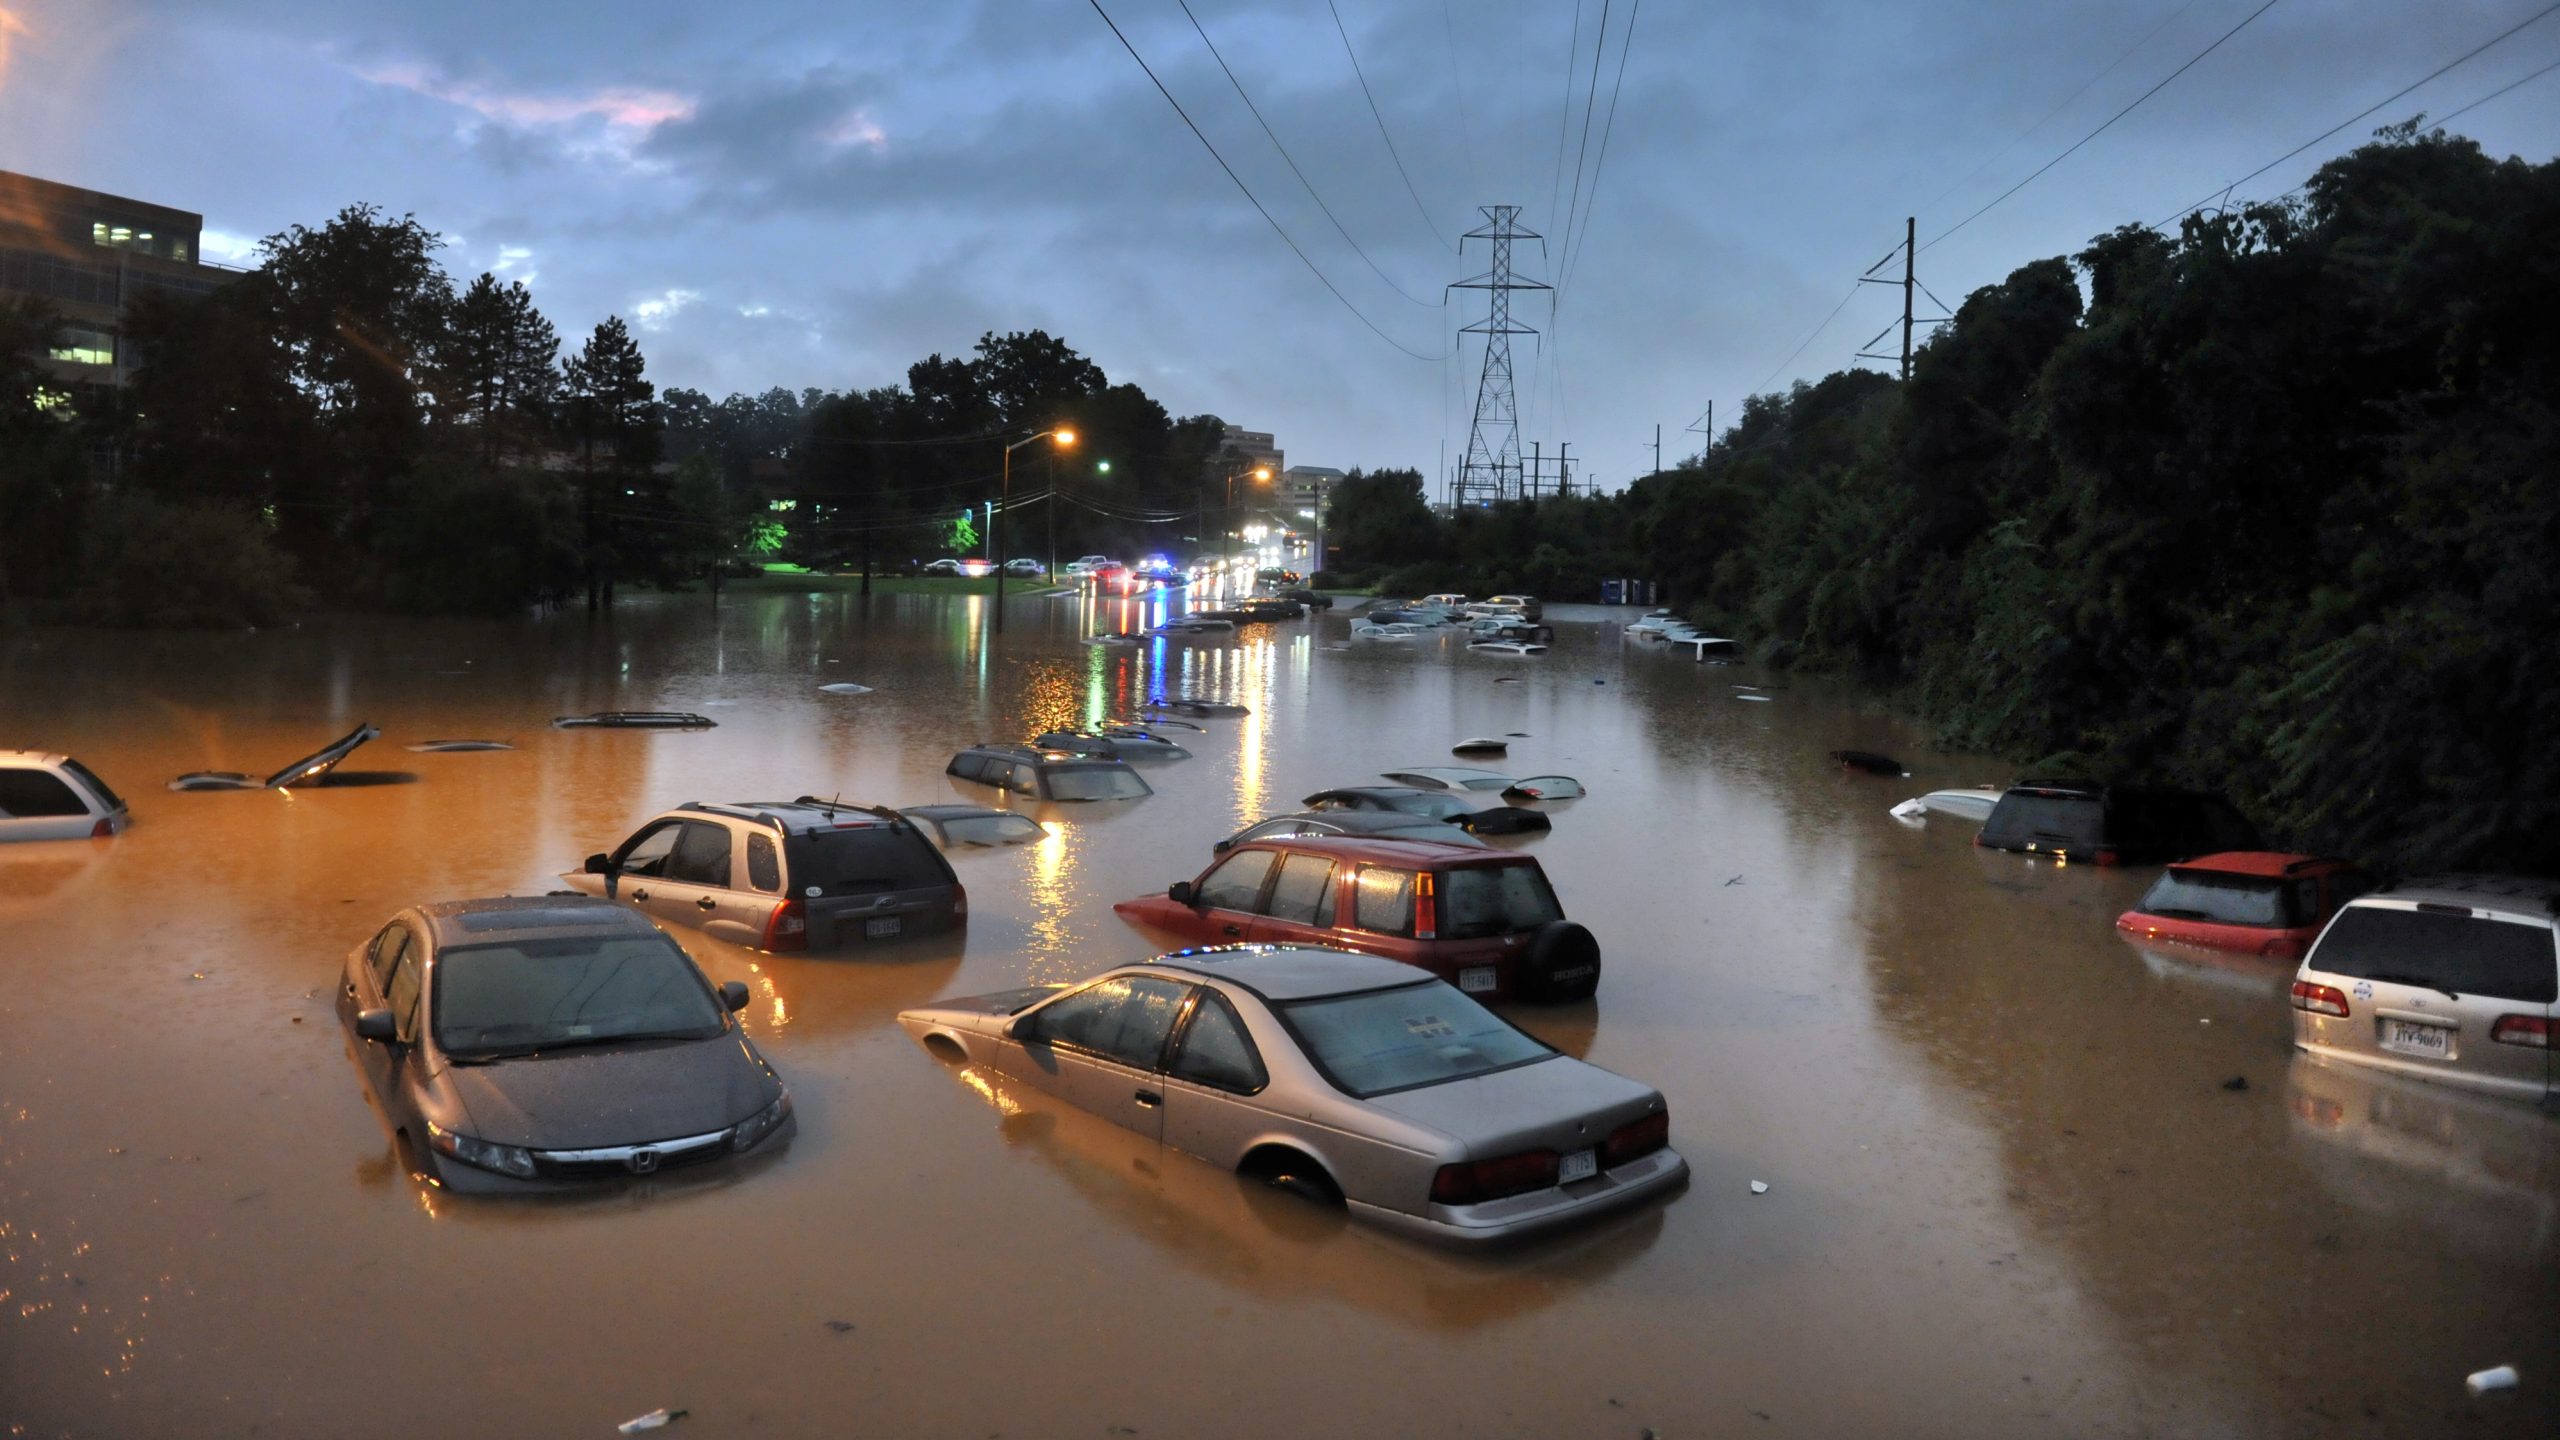 VIO calls for extra care among motorists on flooded roads